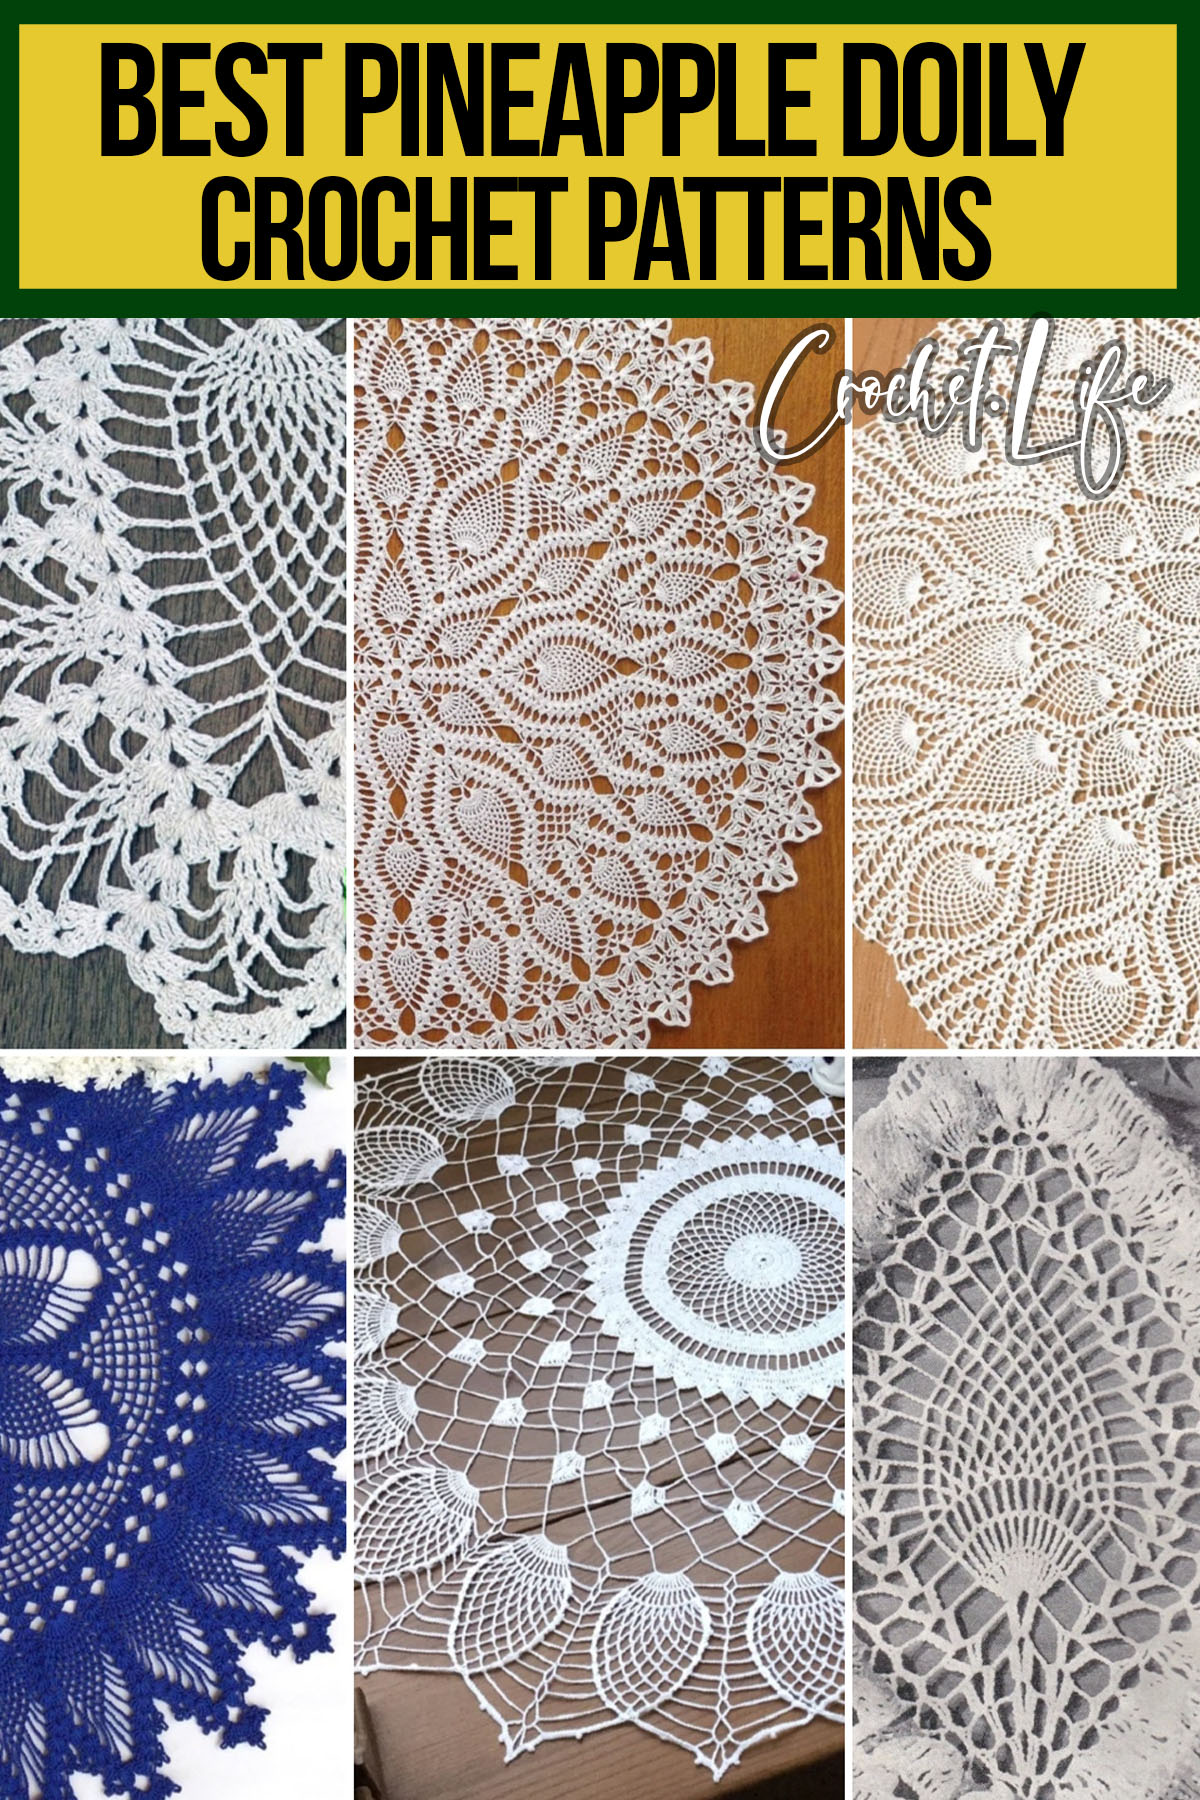 photo collage of crochet doily patterns with text which reads best pineapple doily crochet patterns